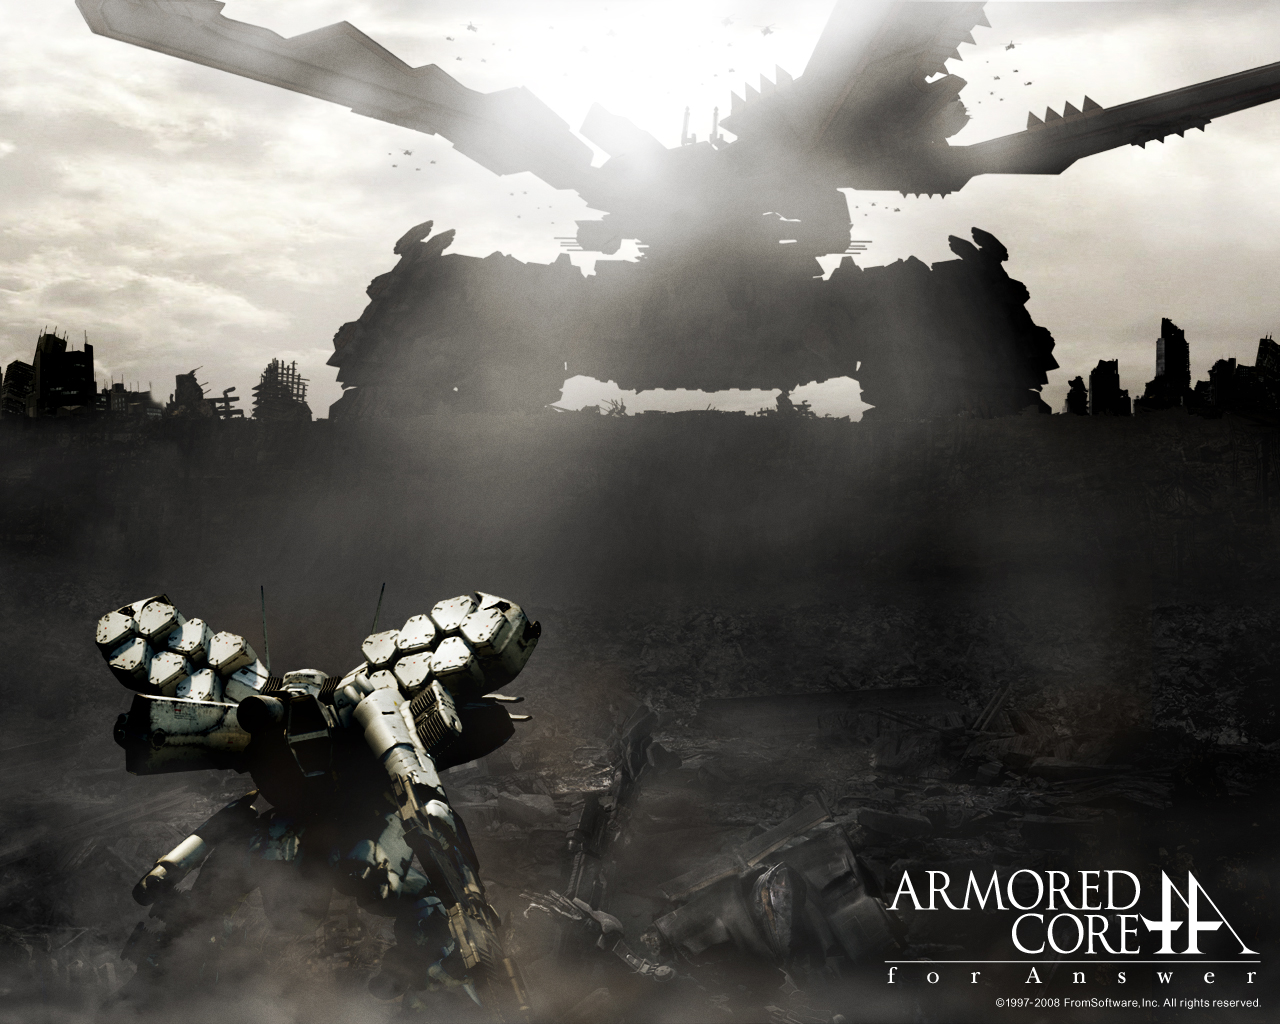 Free Download Armored Core For Answer Wallpaper 02 jpg 1280x1024 For Your Desktop Mobile Tablet Explore 74 Armored Core Wallpaper Armored Core Wallpaper Armored Core 5 Wallpaper Armored Warfare Wallpaper